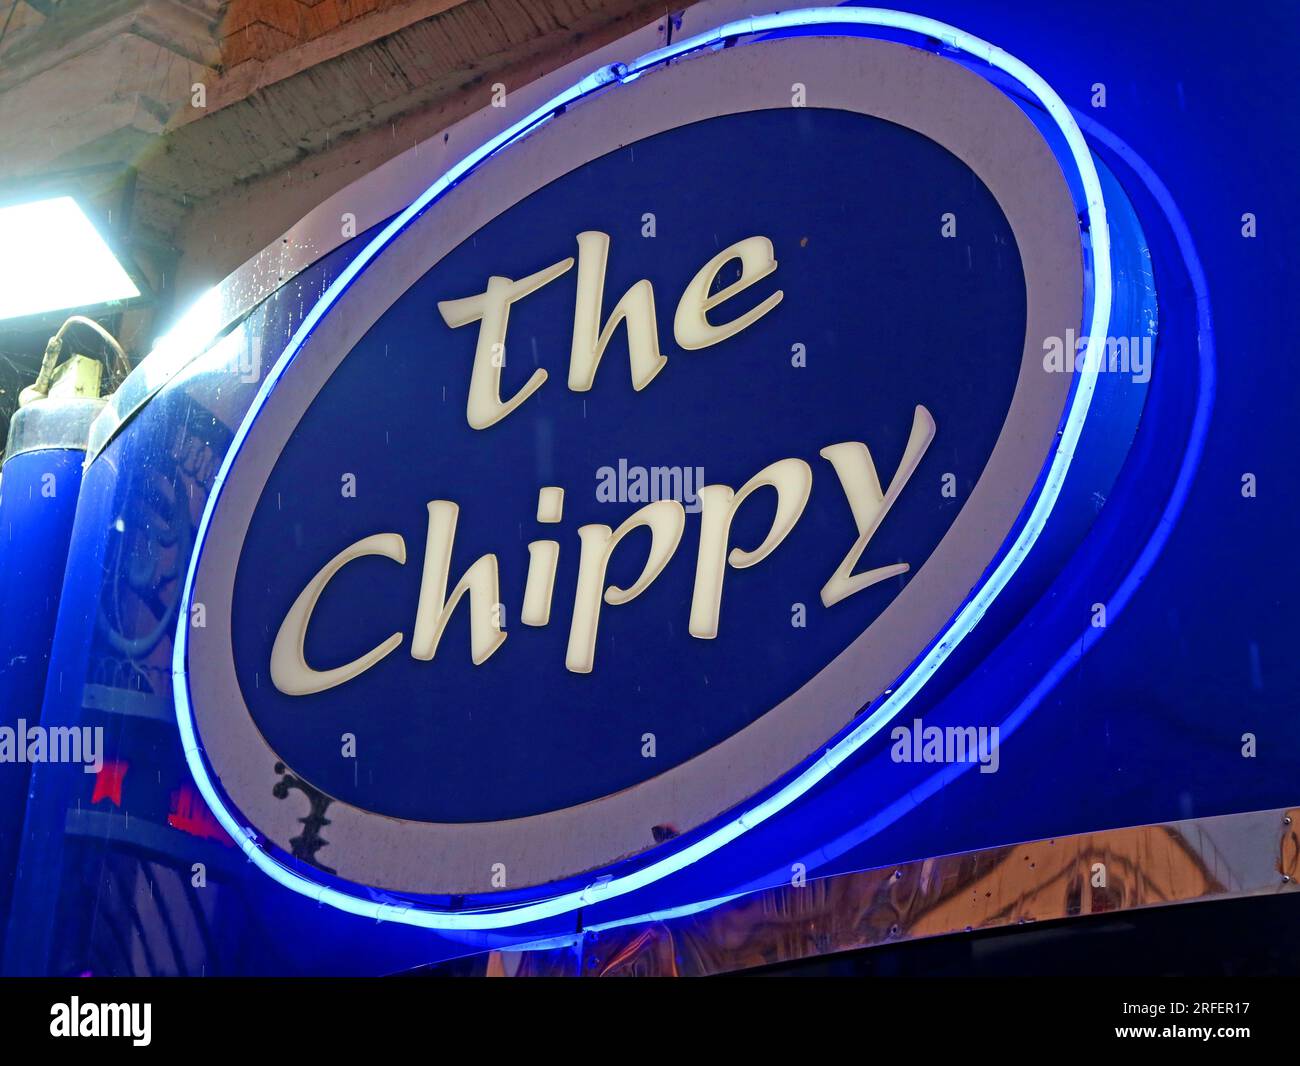 A British institution, The Chippy - neon sign outside a fish and chip shop, located at 78-80, St Mary St, Cardiff, Wales, UK, CF10 1FA Stock Photo